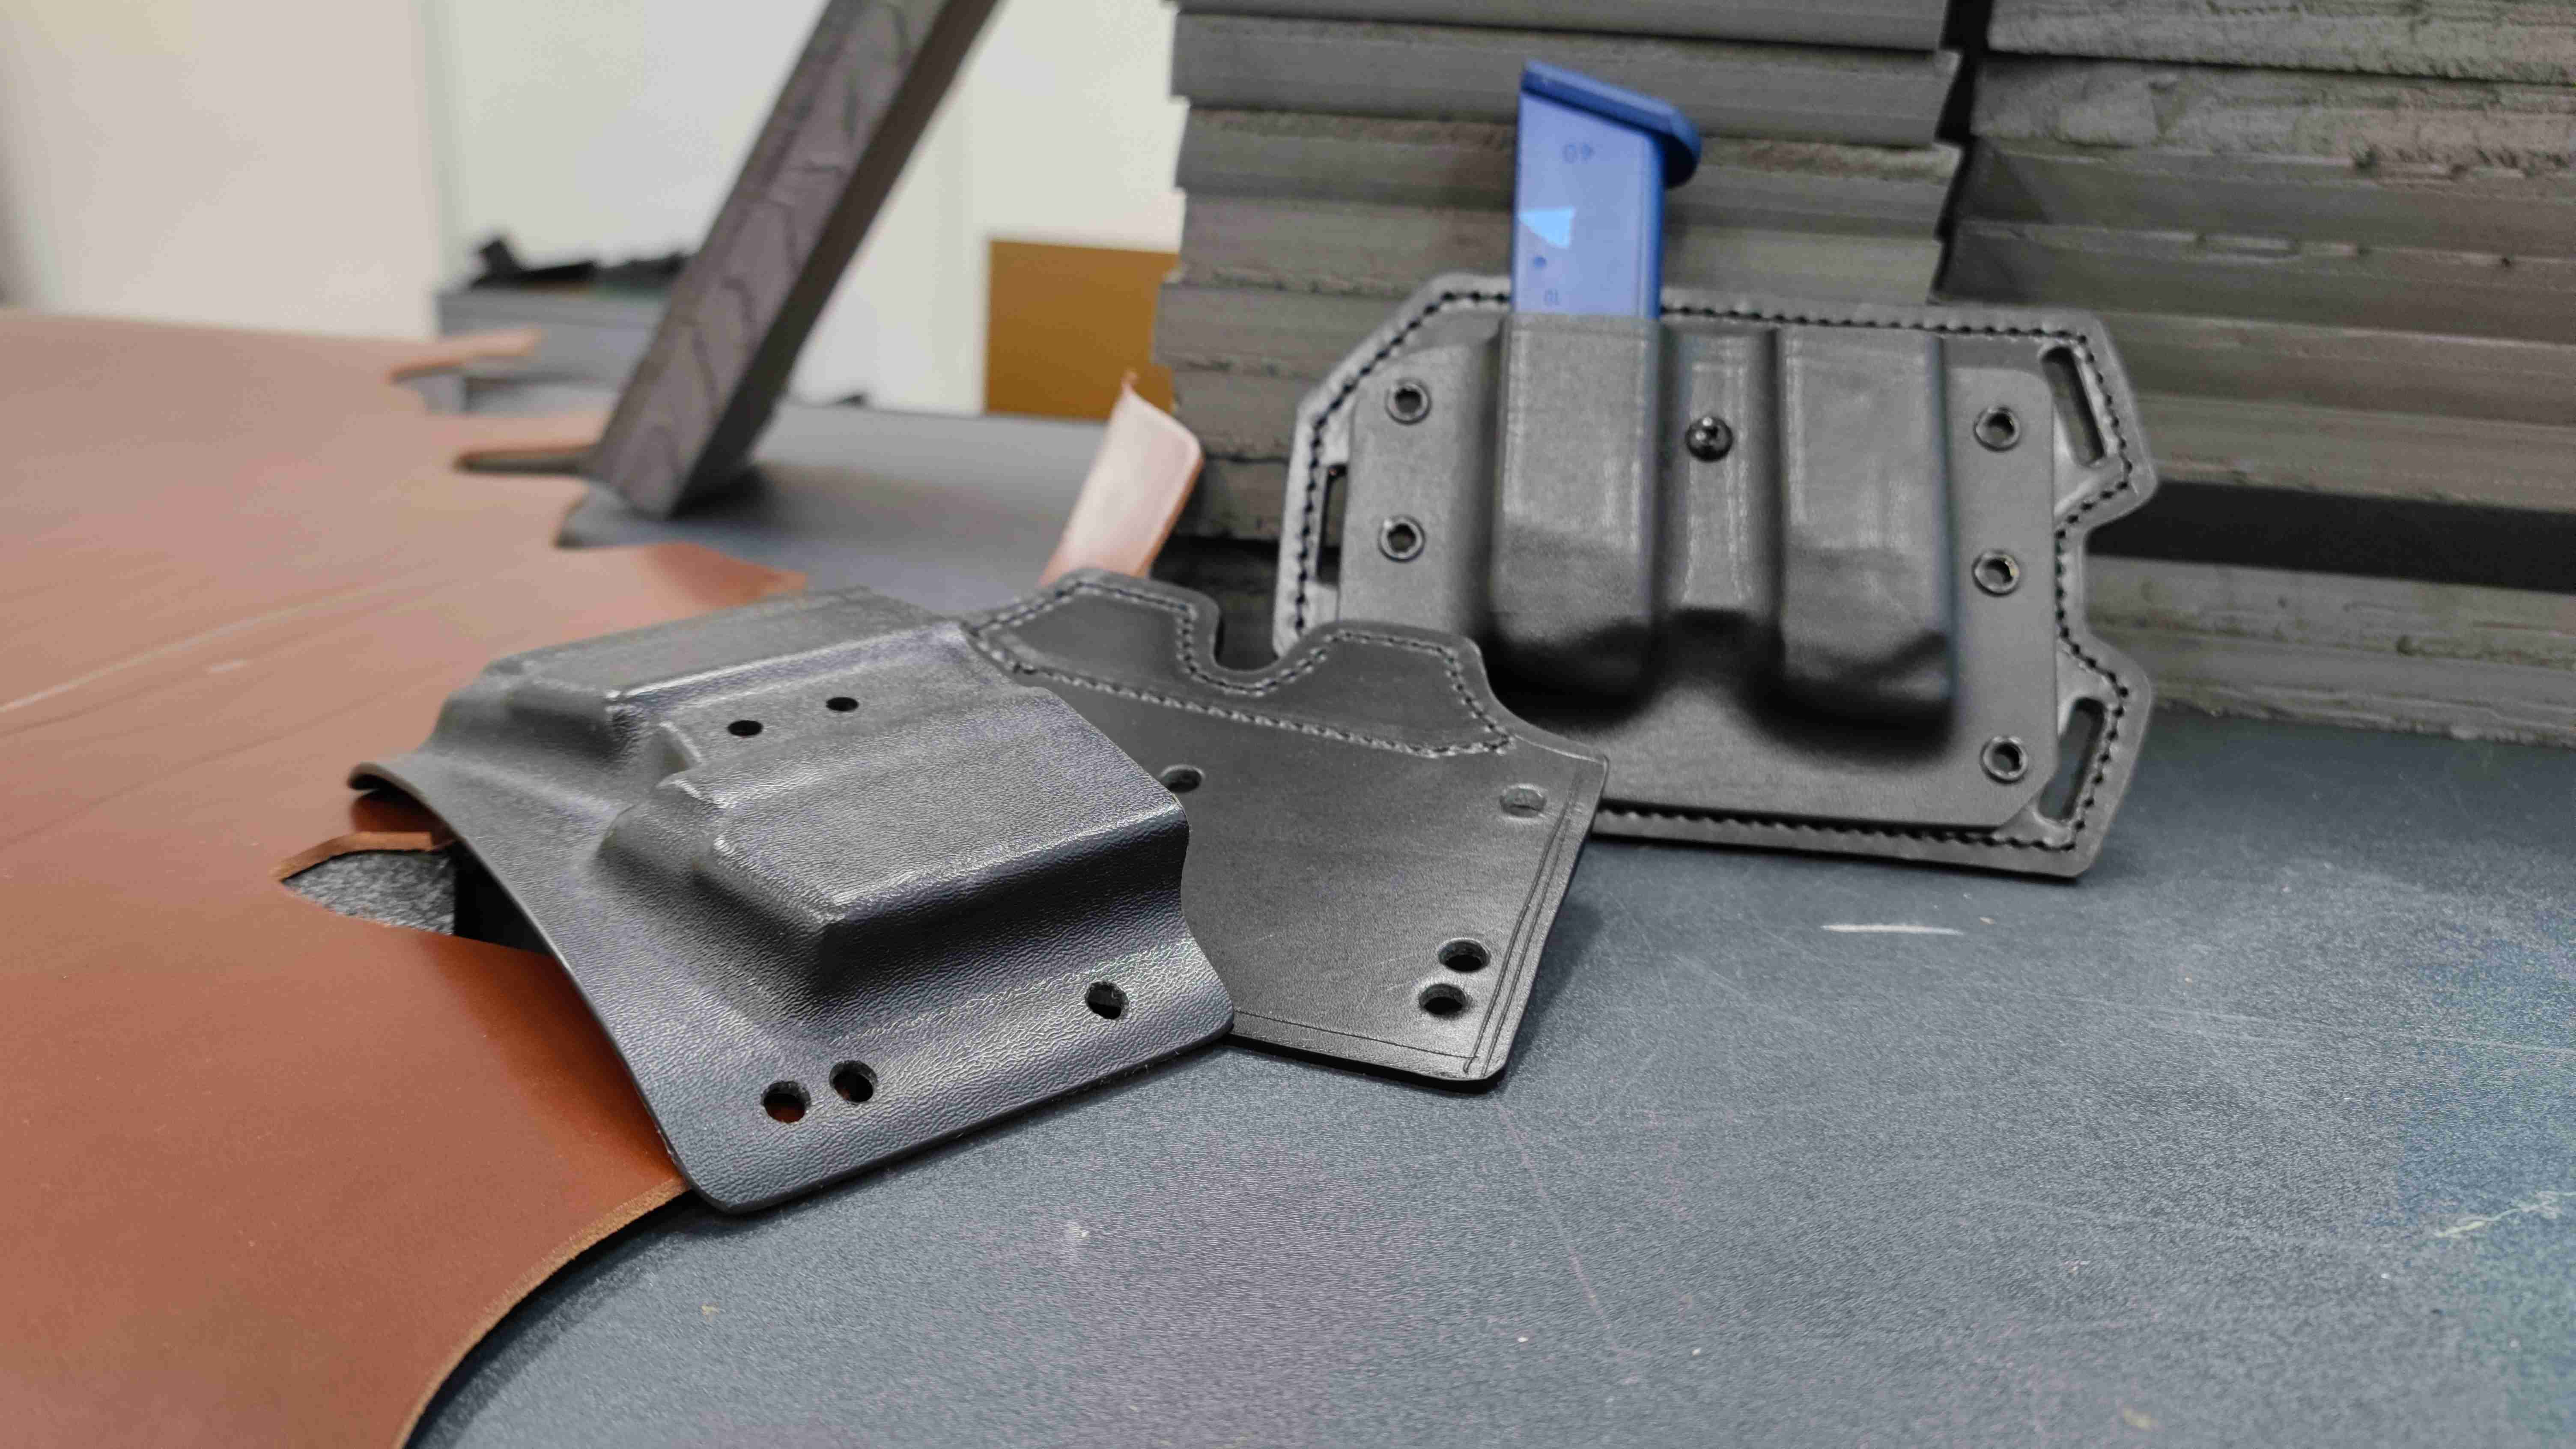 iwb owb hybrid holster in manufacturing process